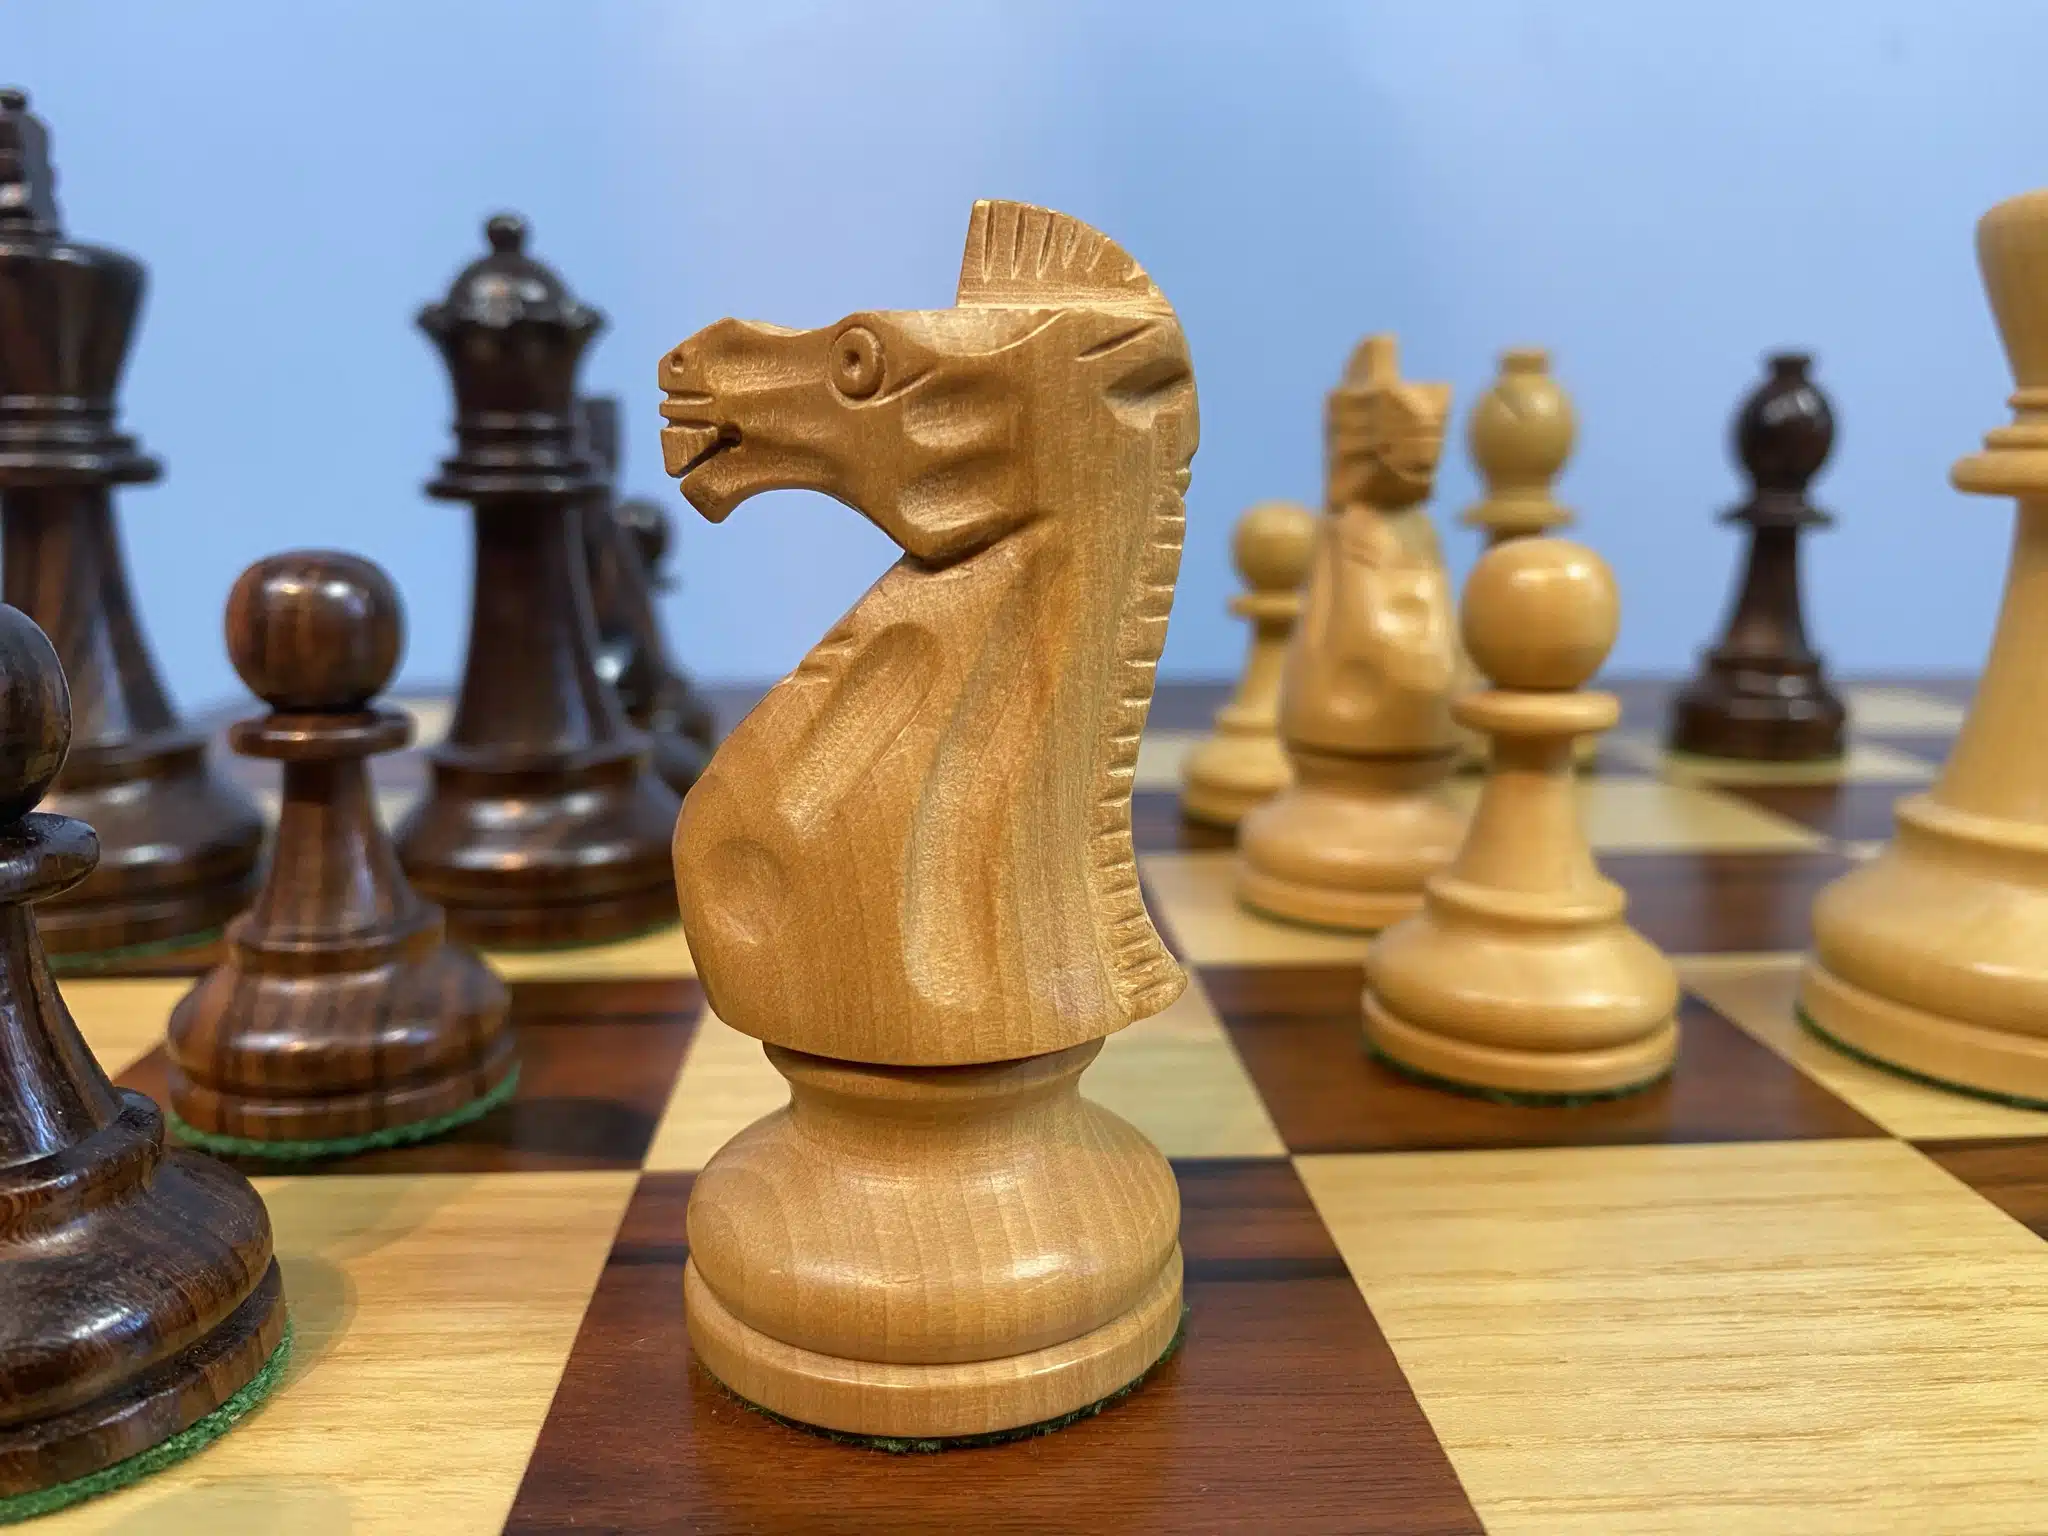 Great chess games – chess-evolution